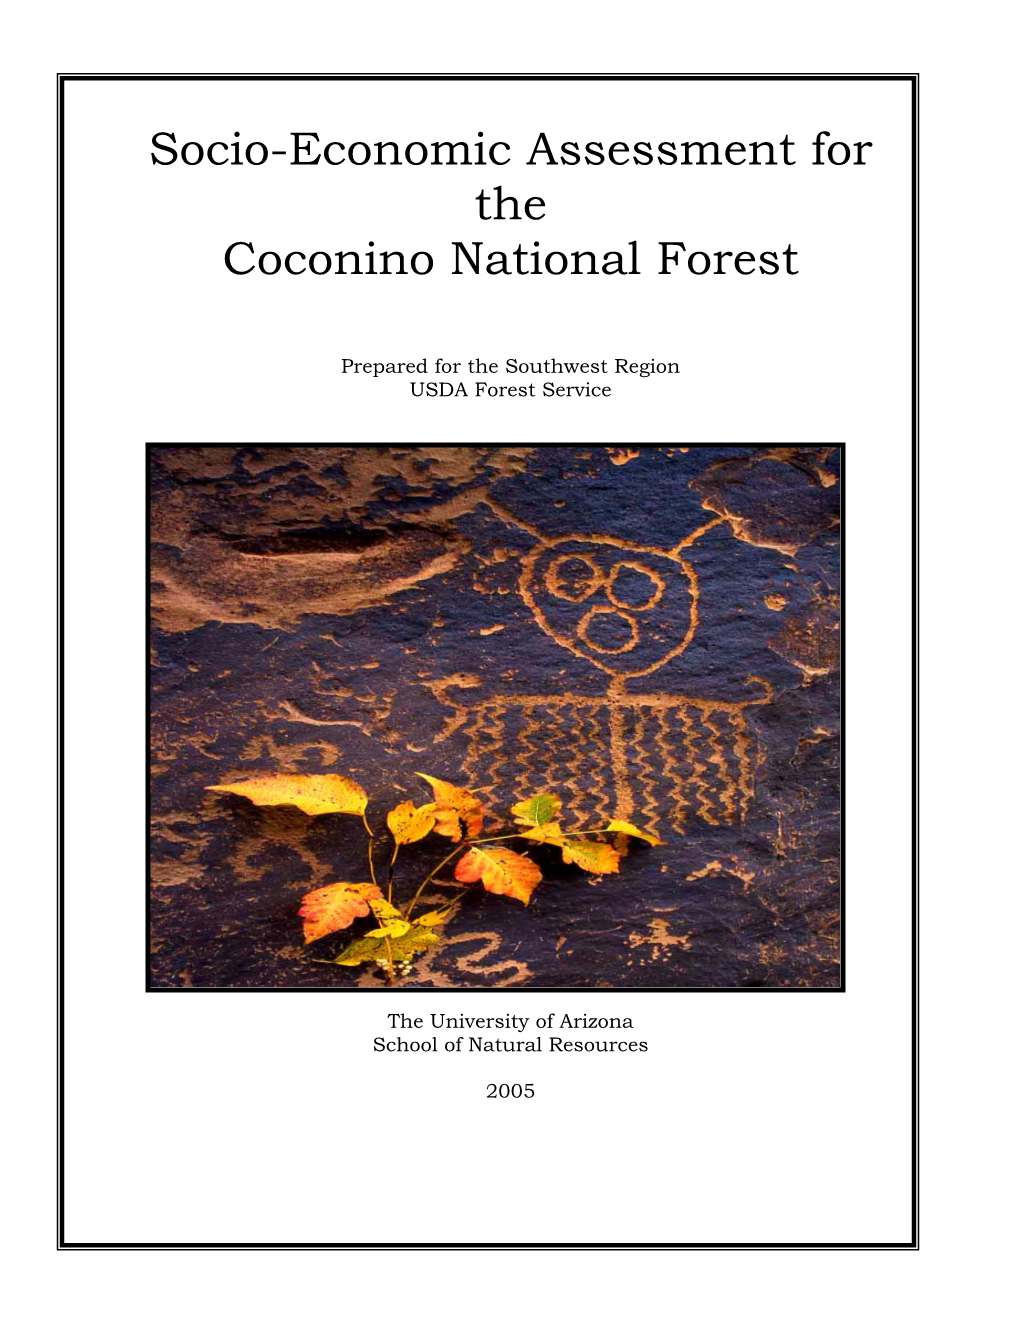 Socio-Economic Assessment for the Coconino National Forest